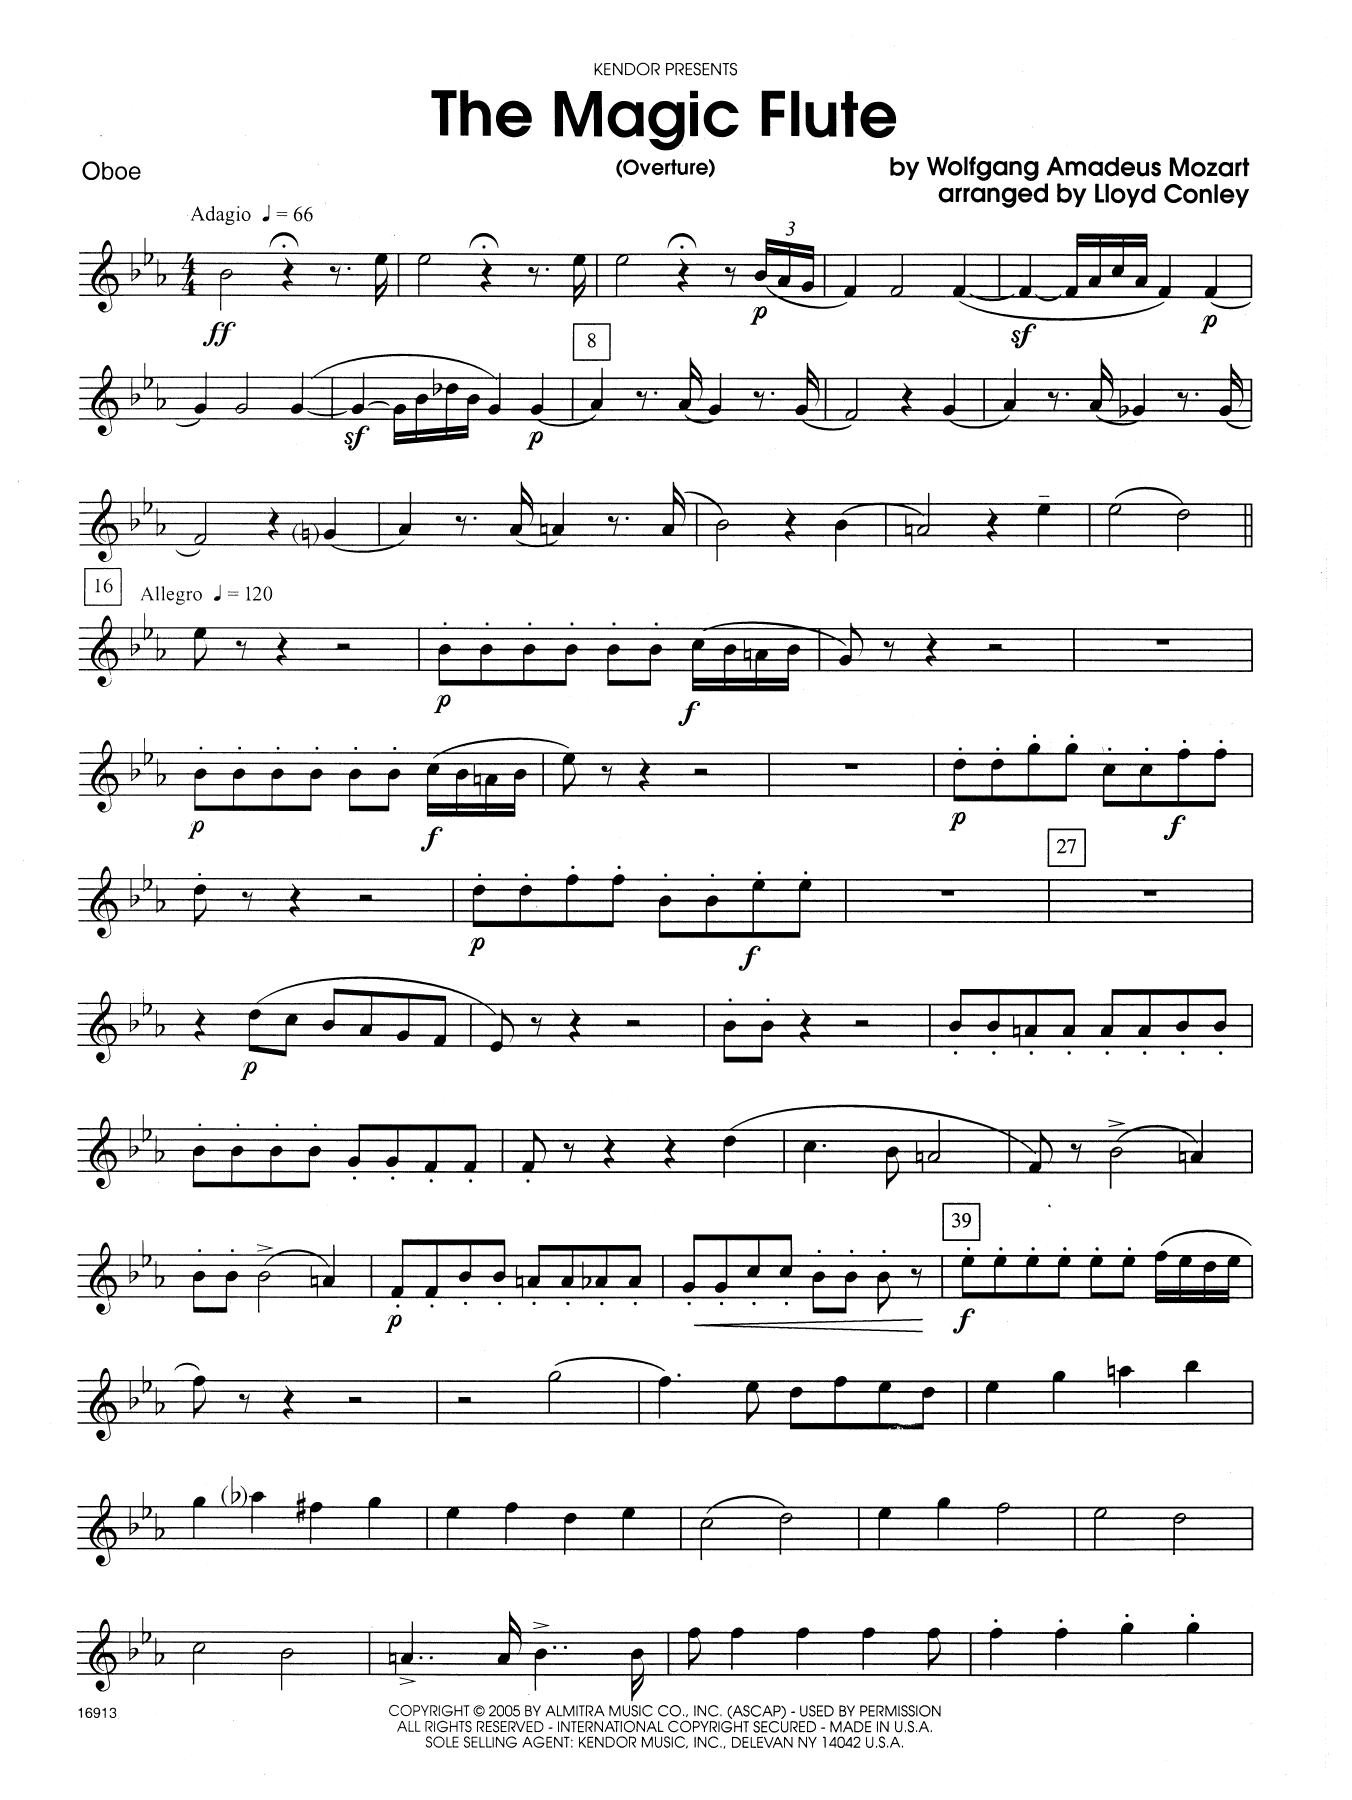 Lloyd Conley The Magic Flute (Overture) - Oboe sheet music notes and chords. Download Printable PDF.